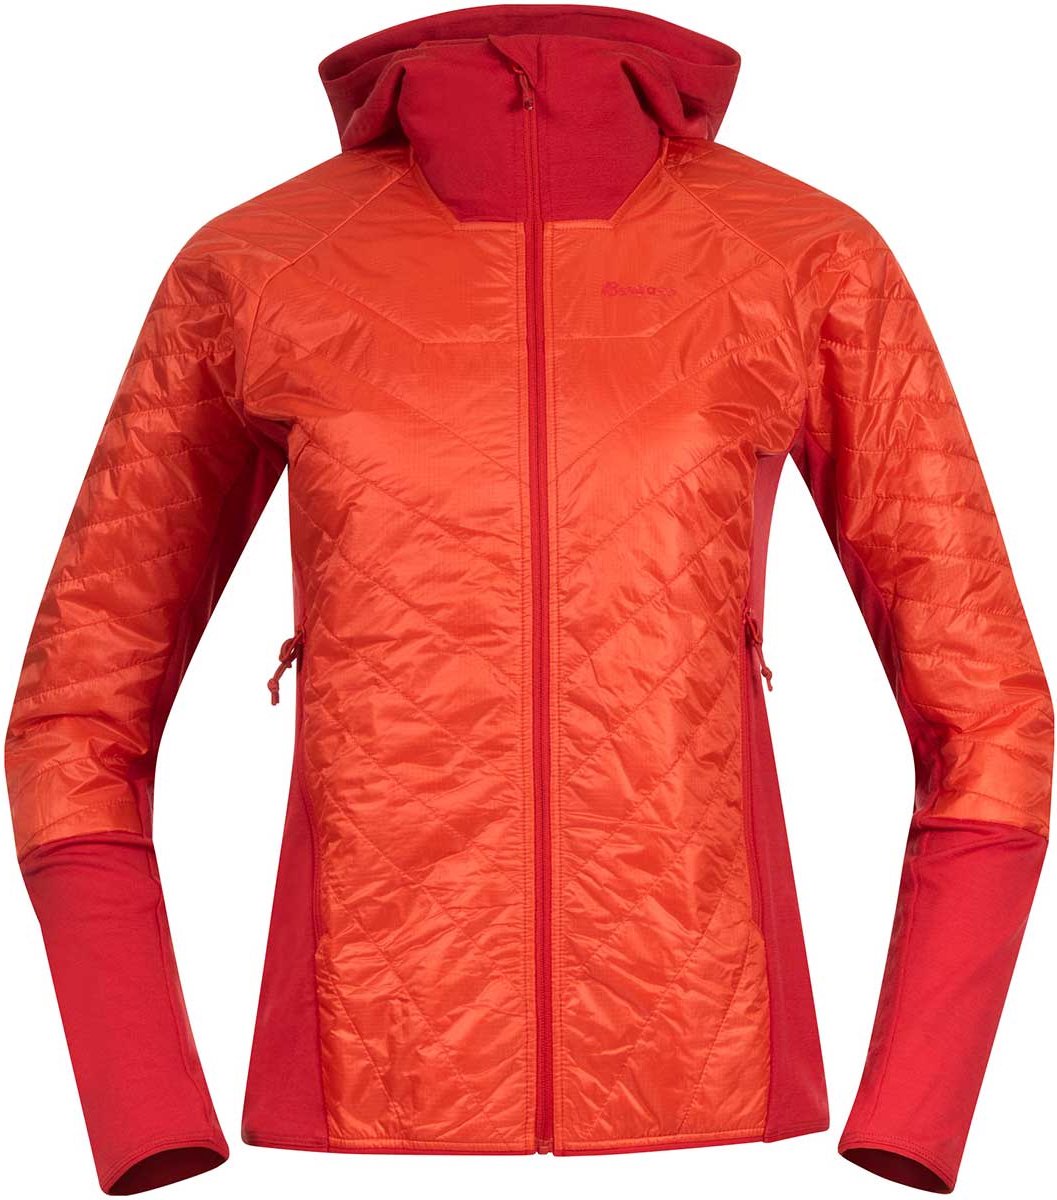 Bergans Cecilie Light Insulated Hybrid - Energy red-red leaf - Maat S